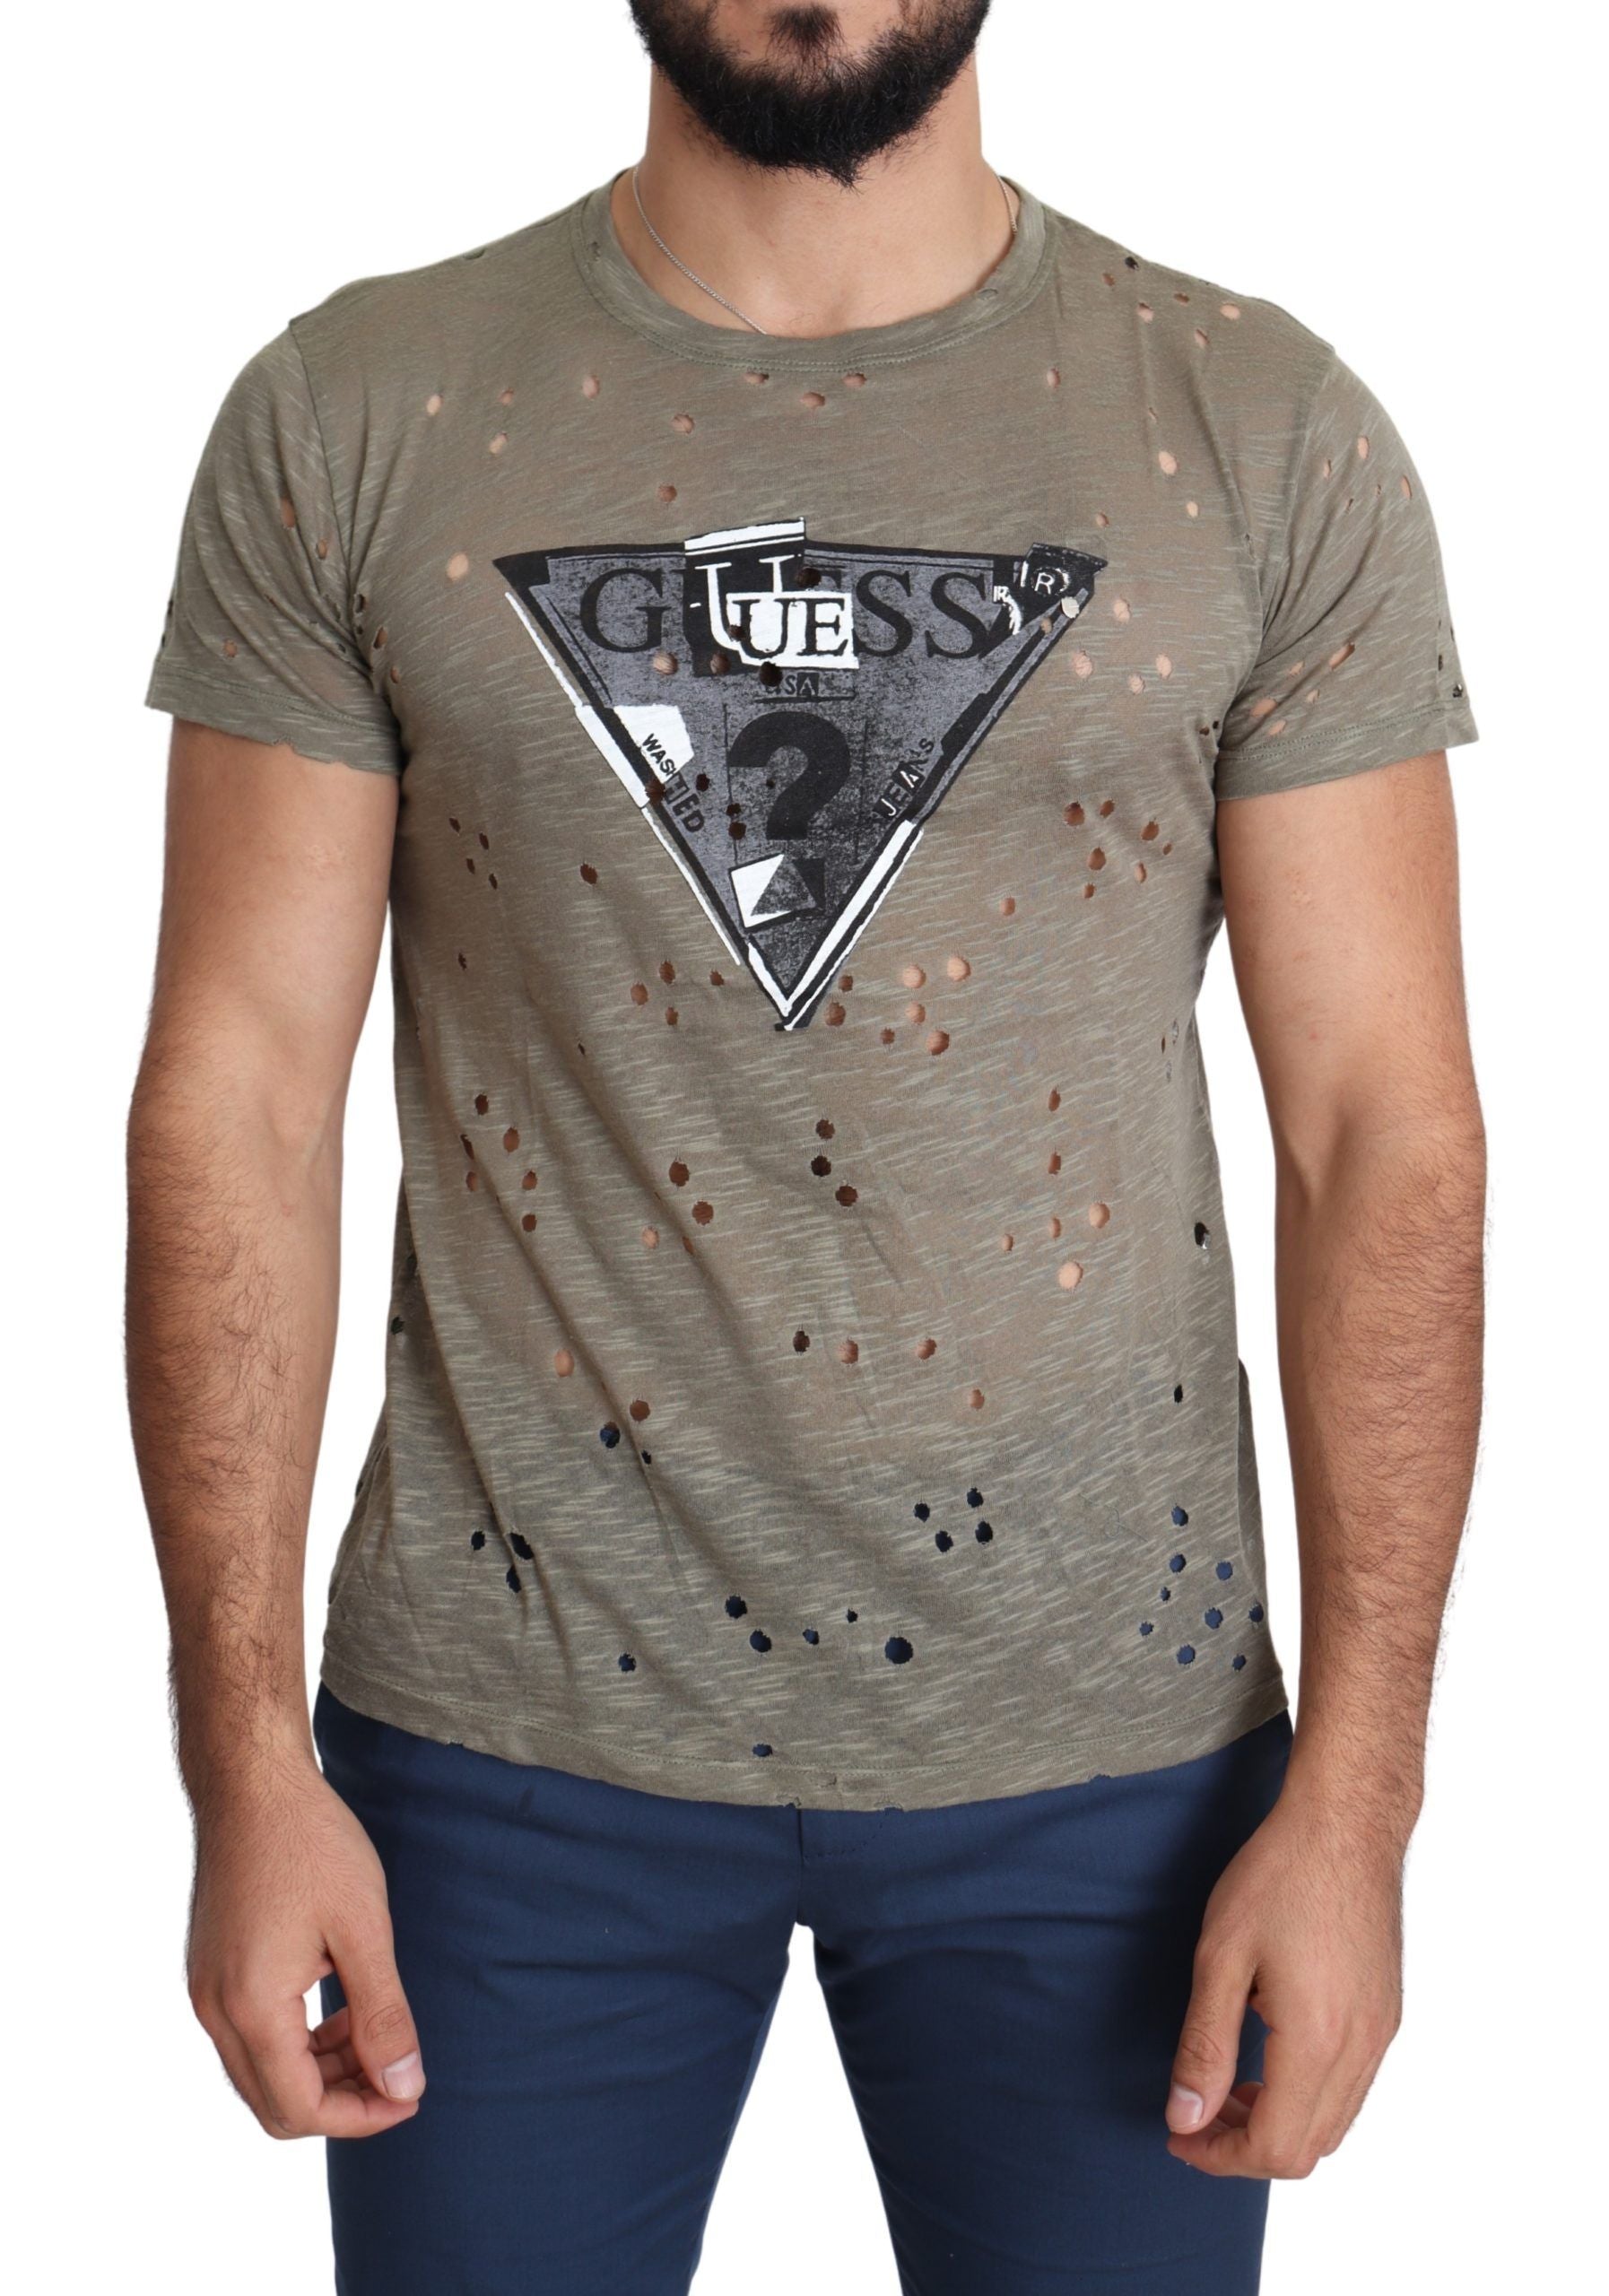 Brown Cotton Stretch Logo Print Men Casual Perforated T-shirt